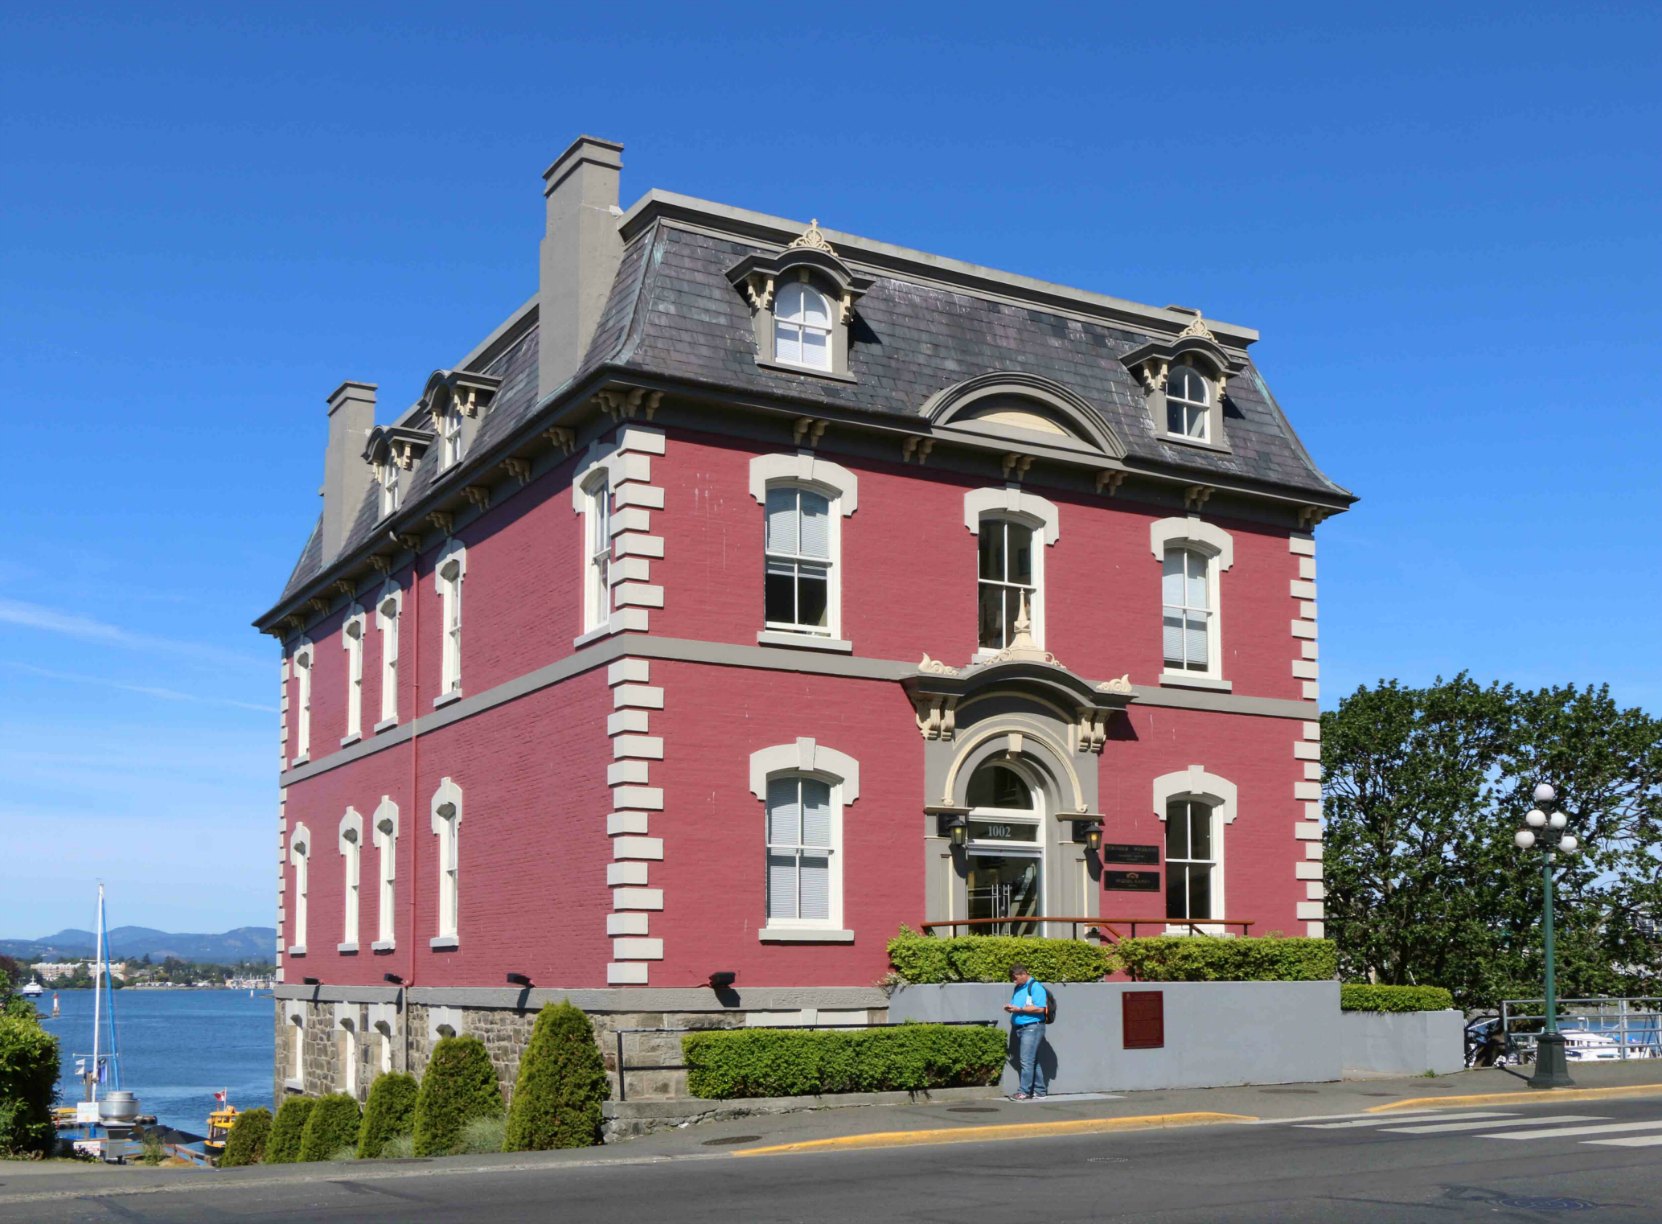 The Customs House at 1002 Wharf Street, built in 1874, is described in Emily Carr's The Book of Small. (photo by Victoria Online Sightseeing)